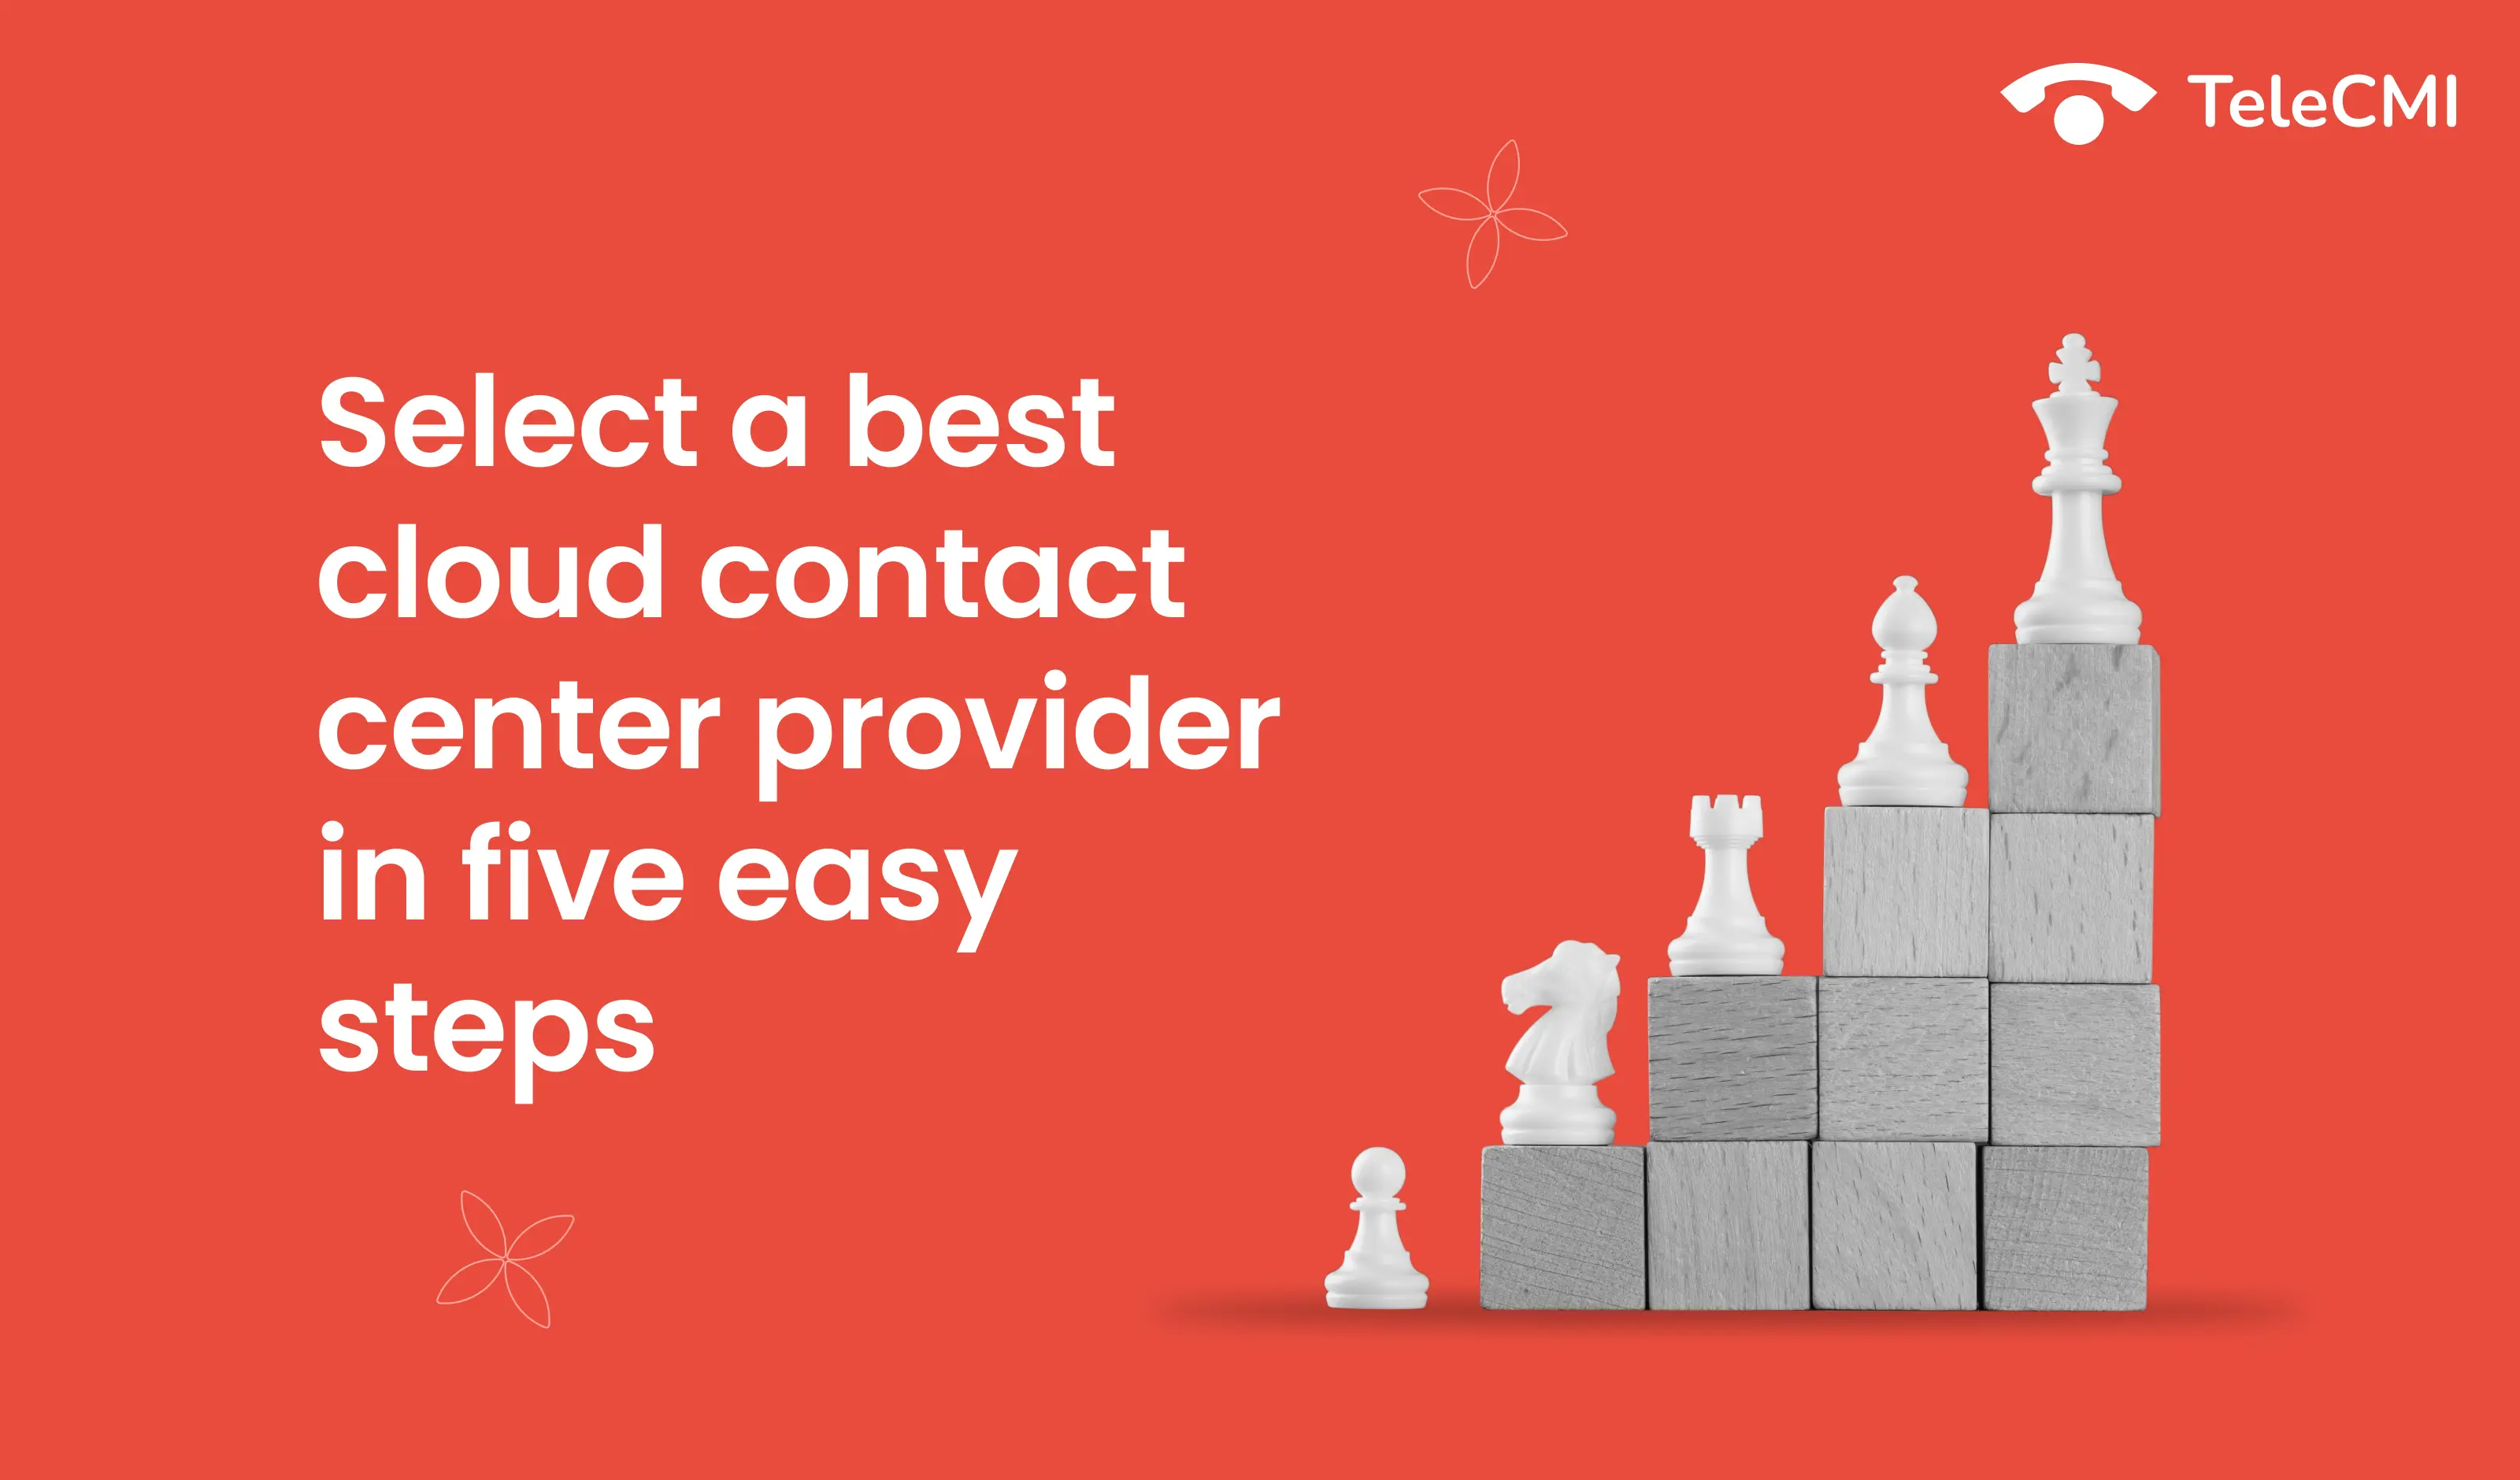 Cloud Contact Center Providers: How to select in 5 easy steps?